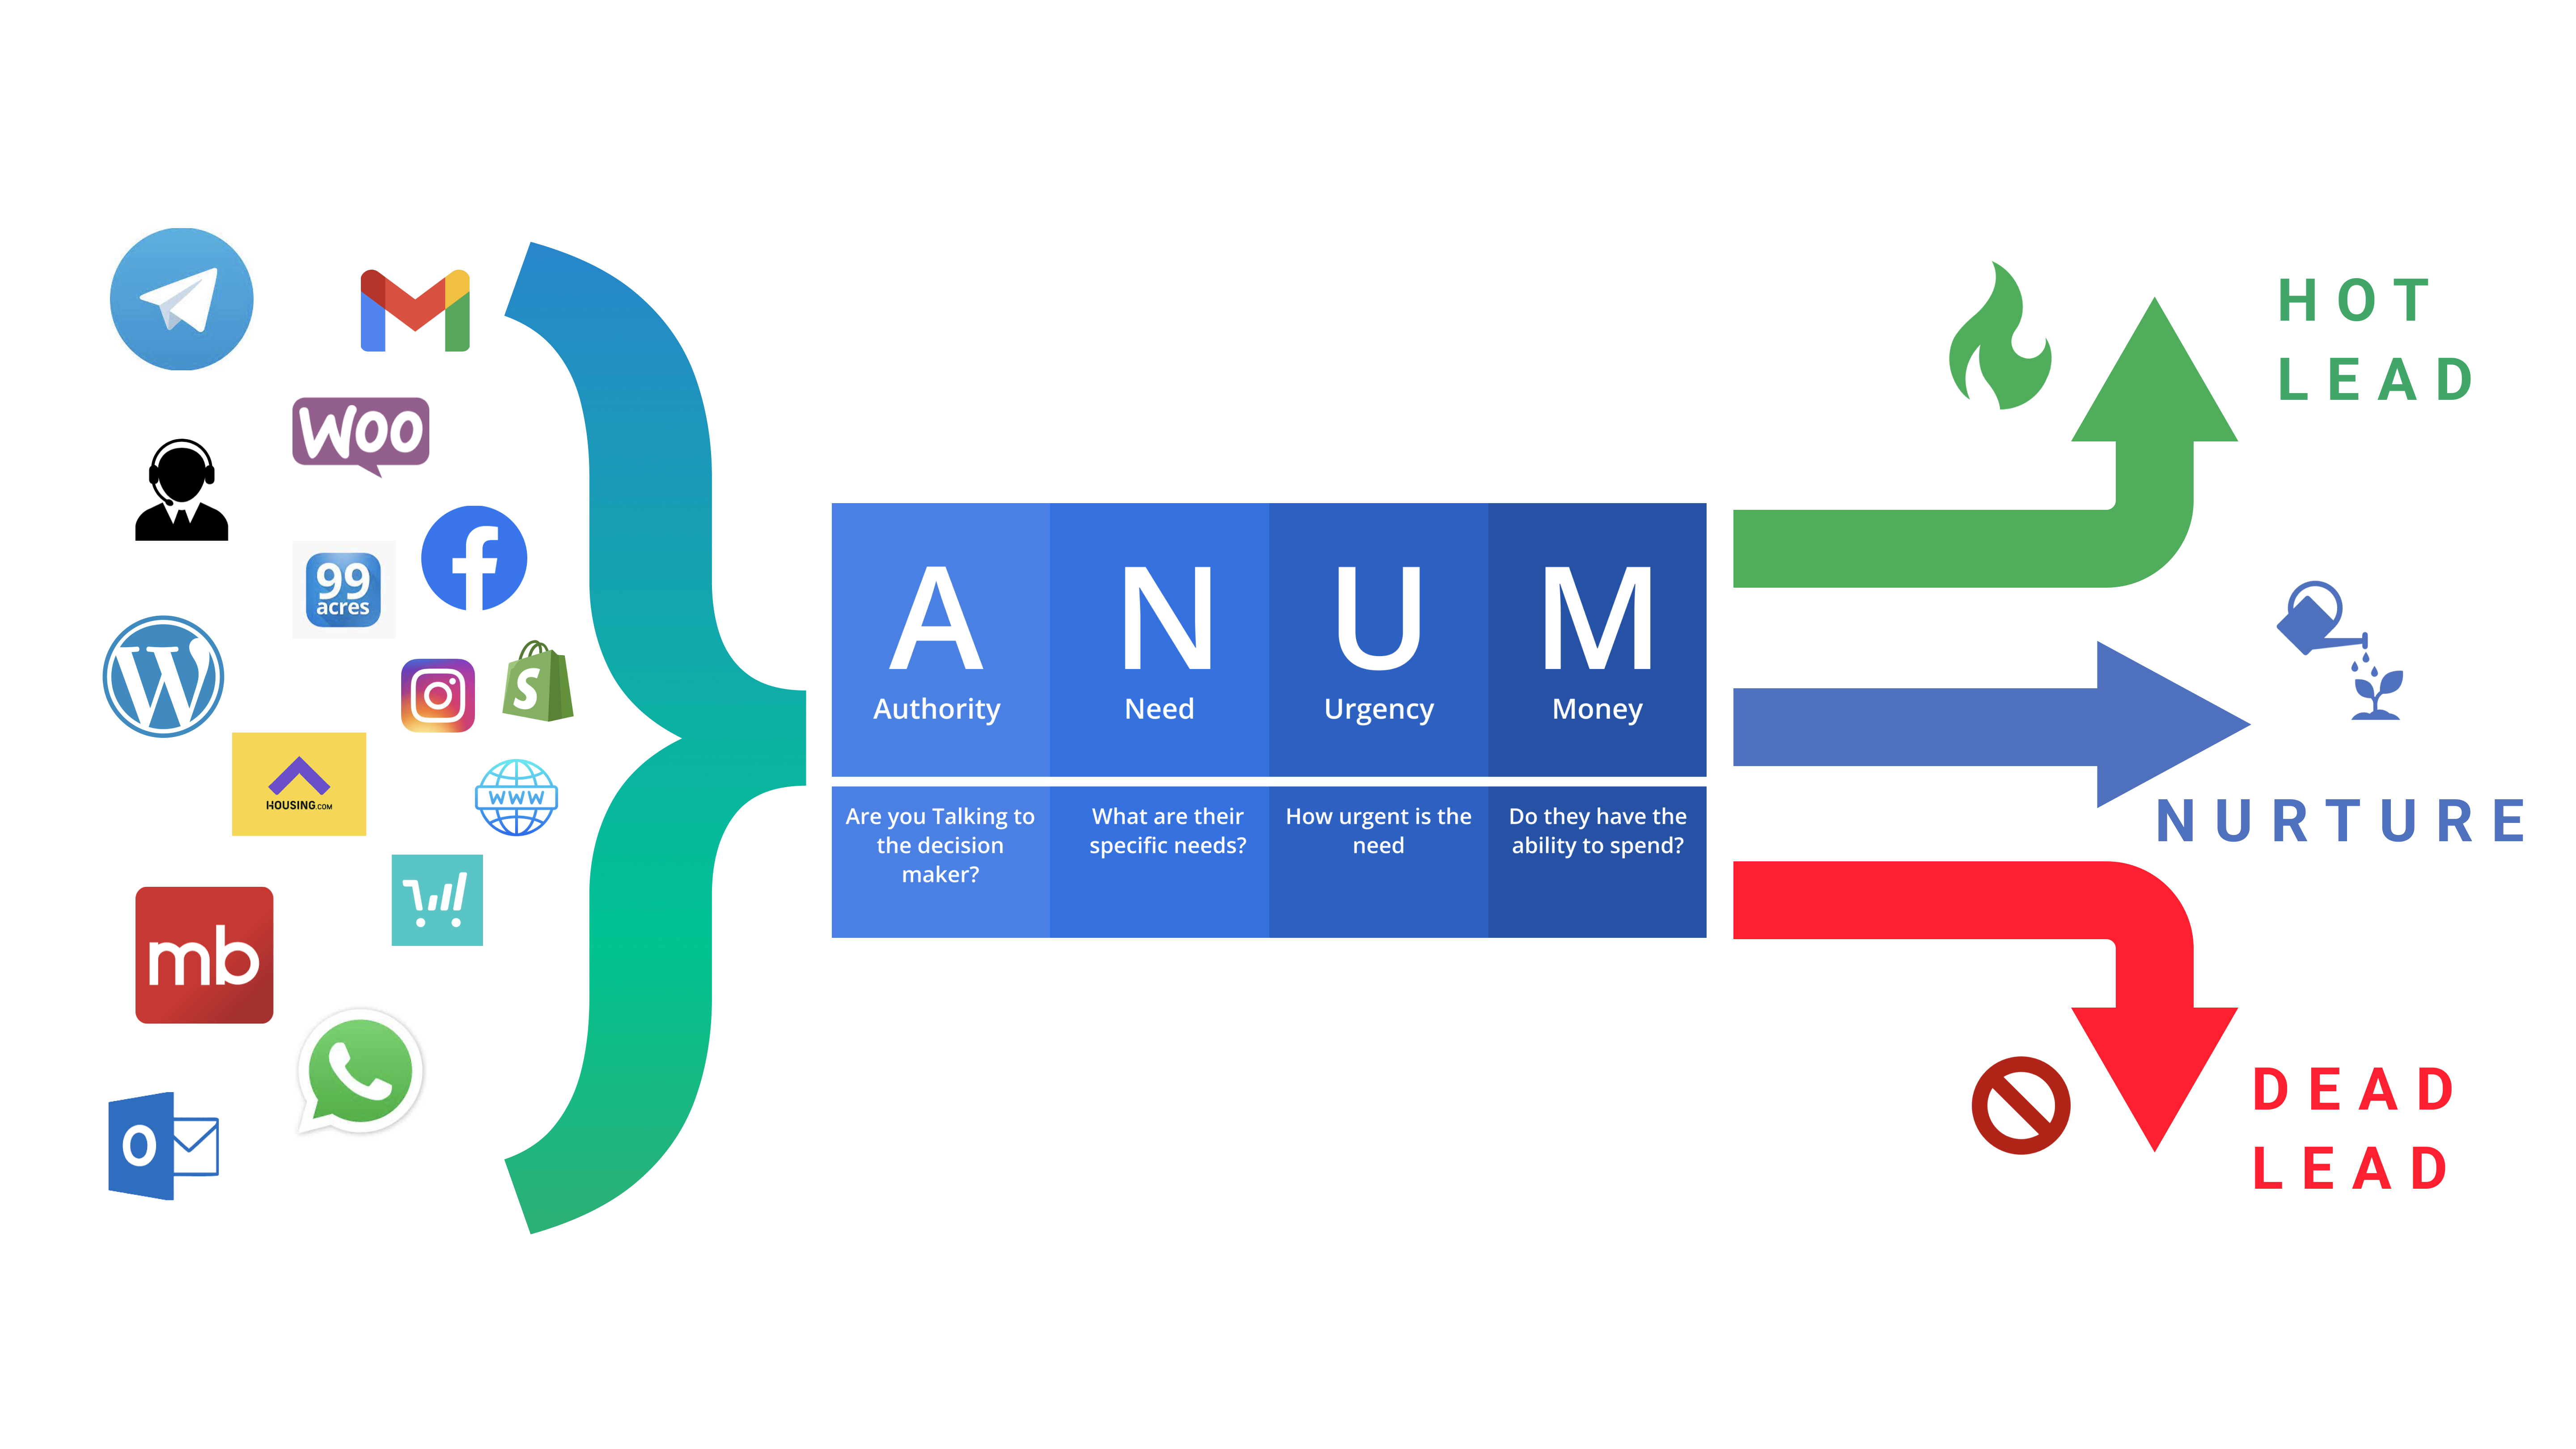 ANUM Framework to qualify leads- Fit, Authority, Interest, Need, Timeline.